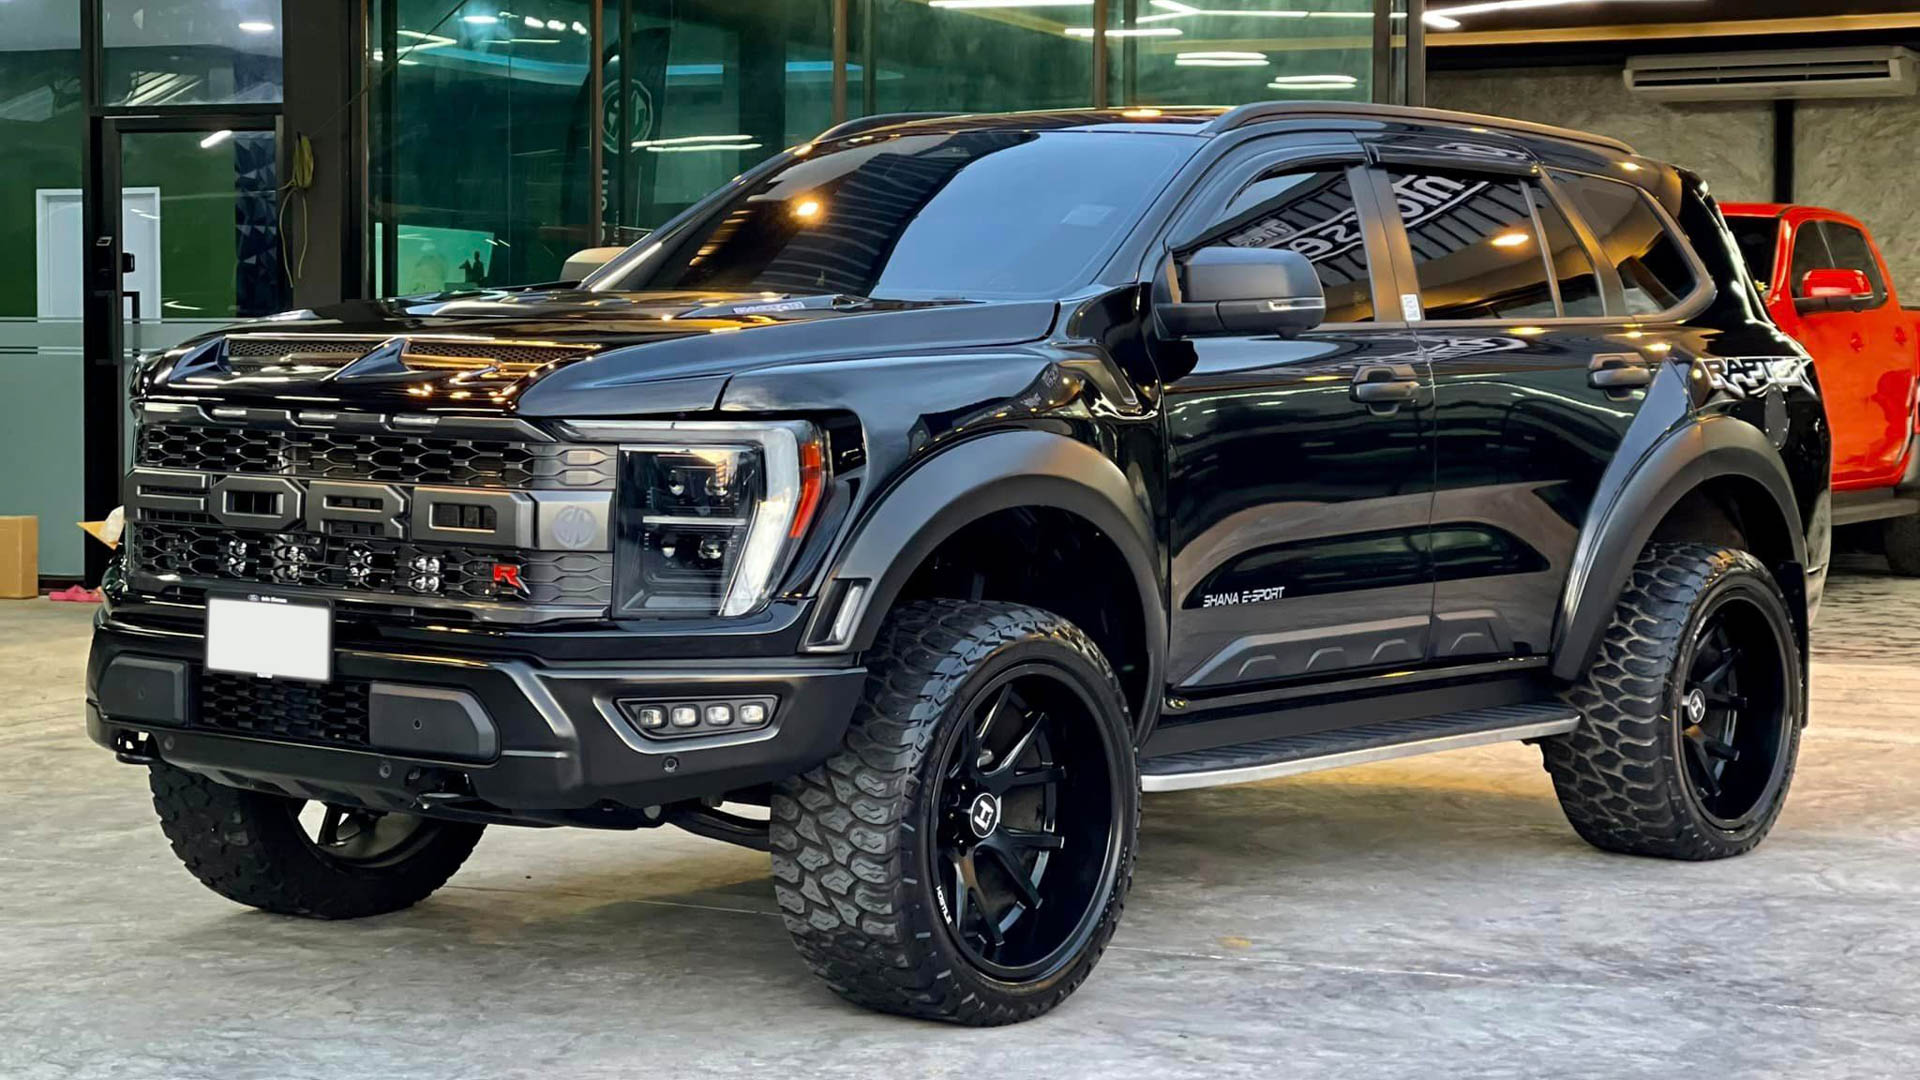 Forbidden Fruit Shop Builds a Midsize Ford Raptor SUV From a Ford Everest